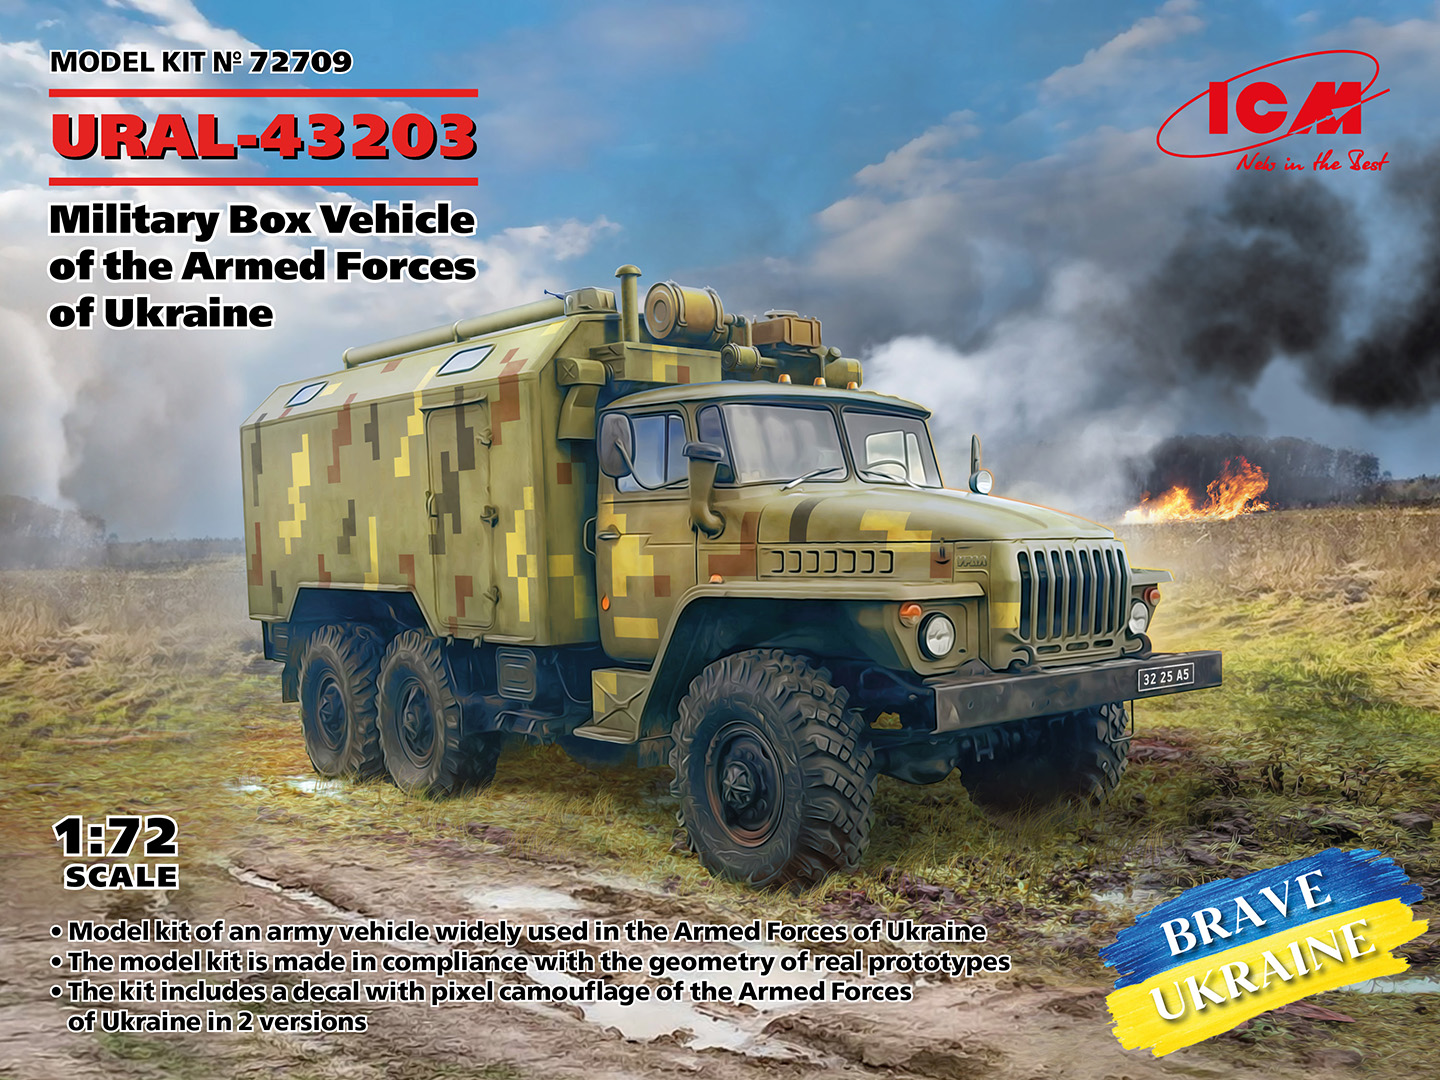 Fotografie 1/72 URAL-43203, Military Box Vehicle of the Armed Forces of Ukraine